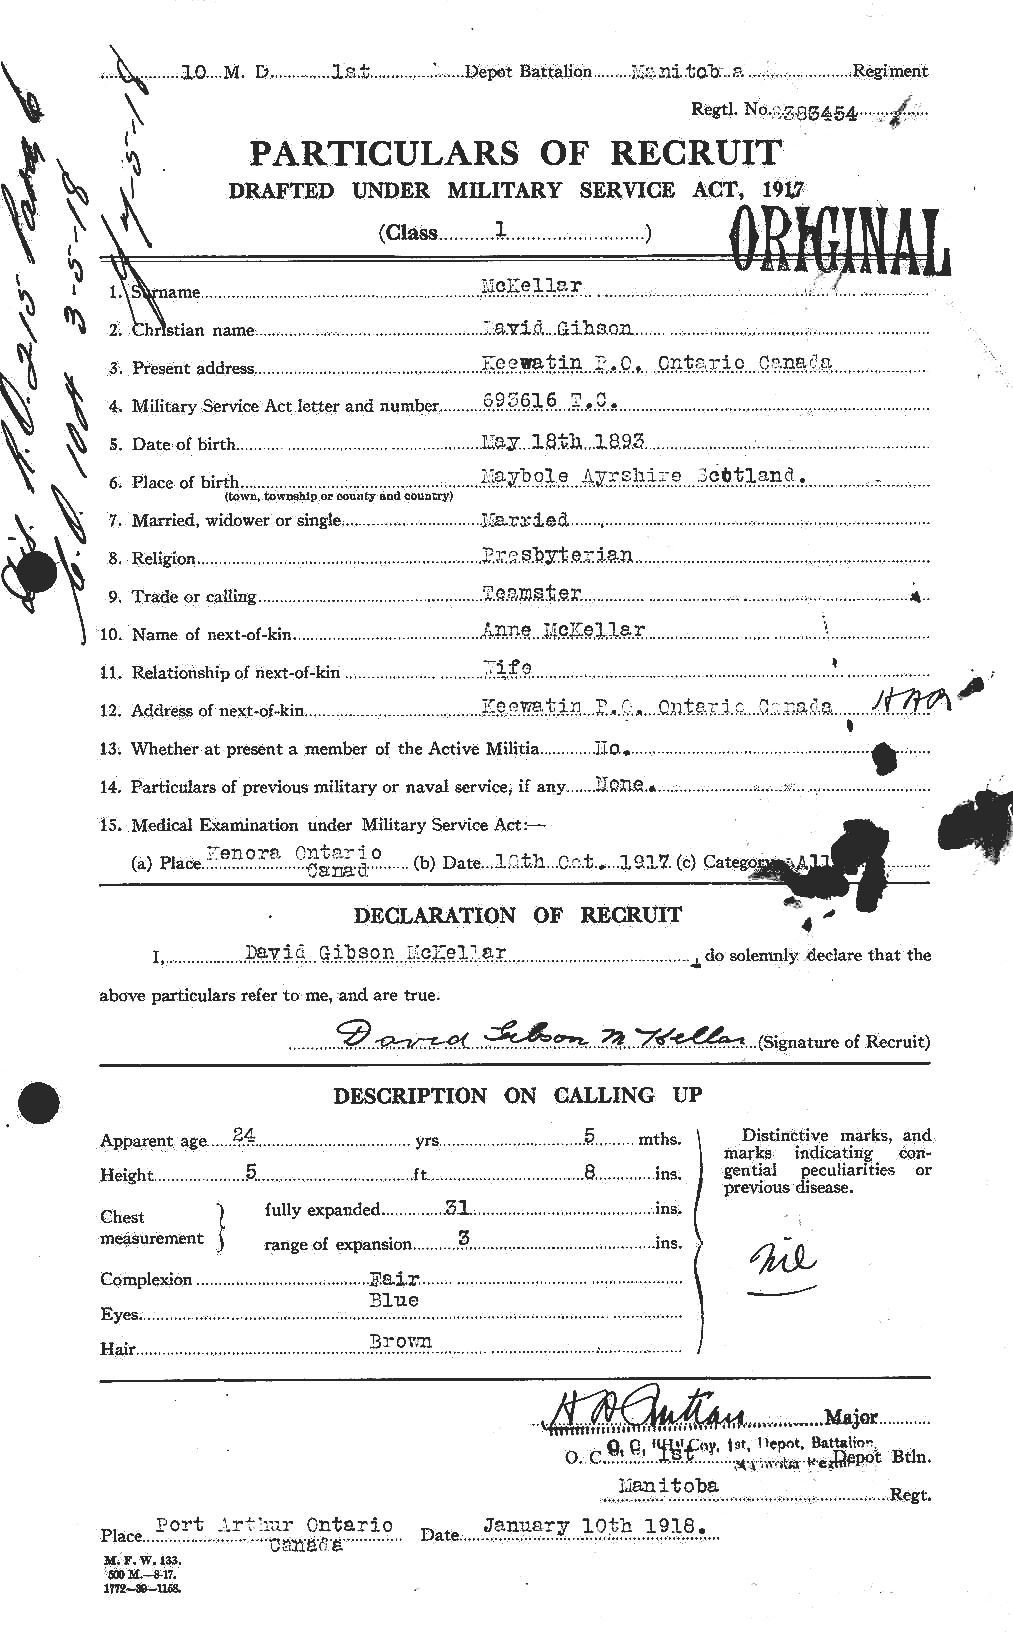 Personnel Records of the First World War - CEF 535882a